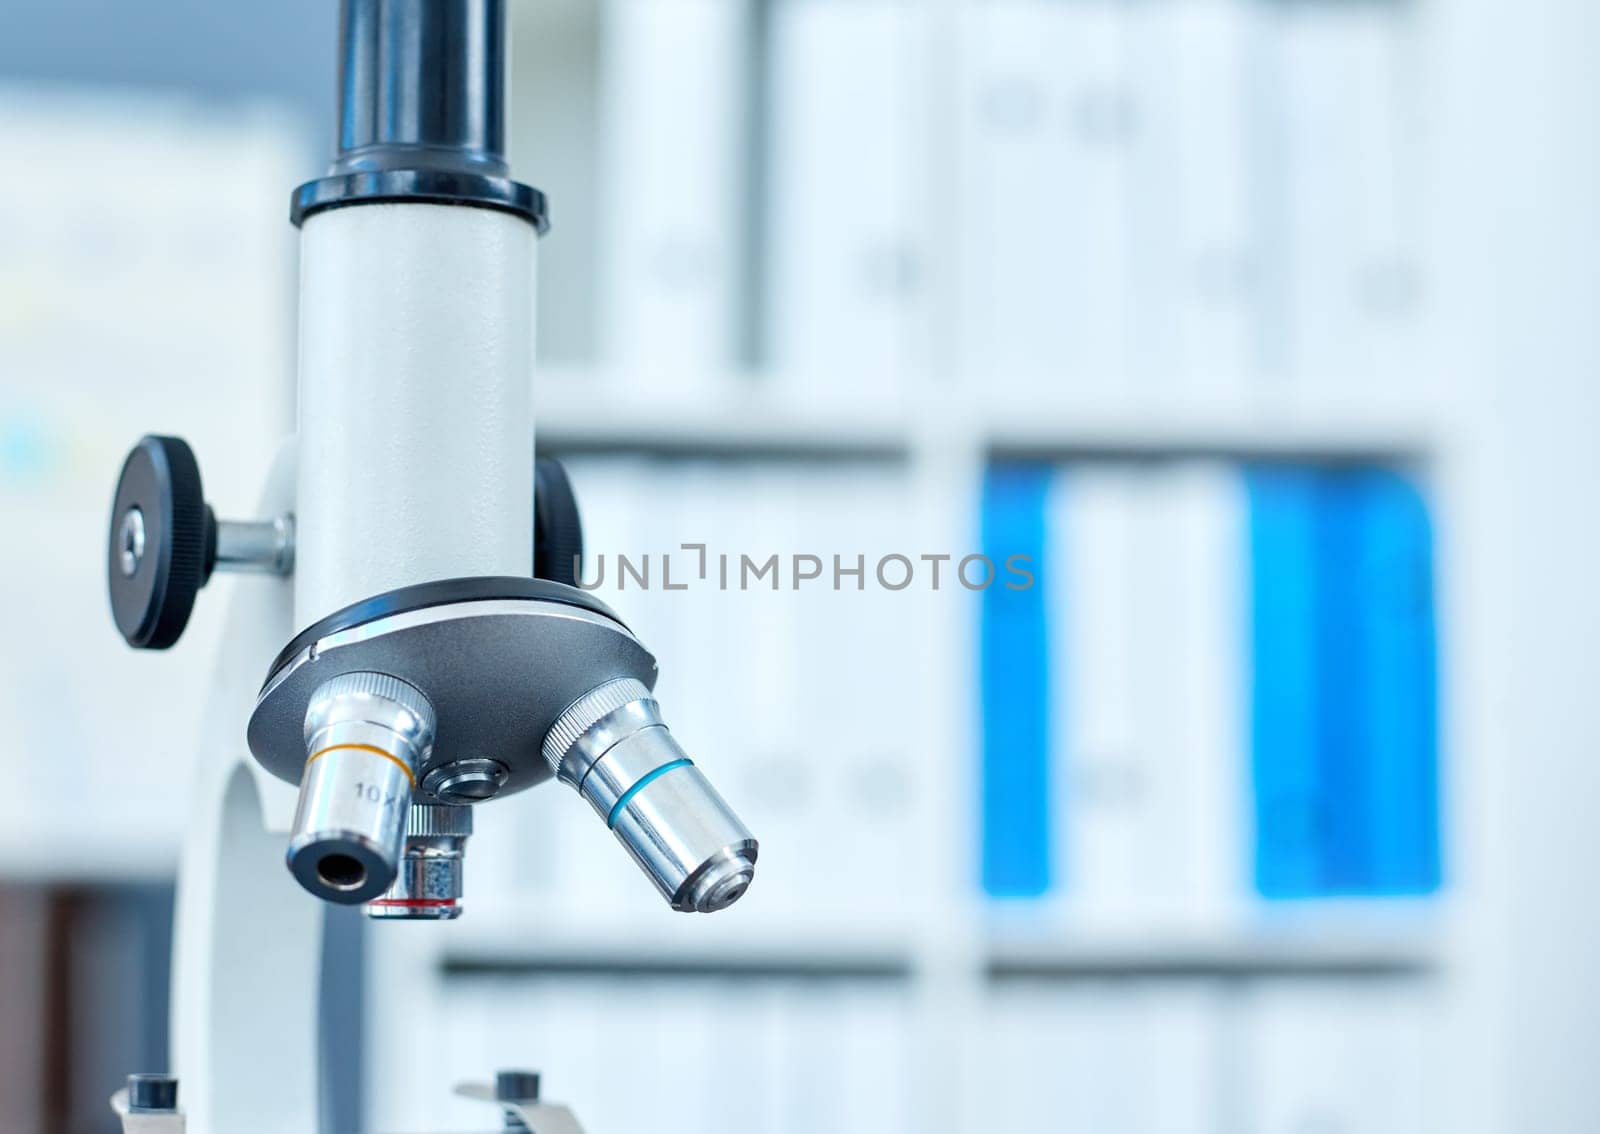 Lab, tools and microscope for medical study, vaccine development and innovation in healthcare. Science, medicine and laboratory equipment for pharmaceutical test, investigation or biotech research